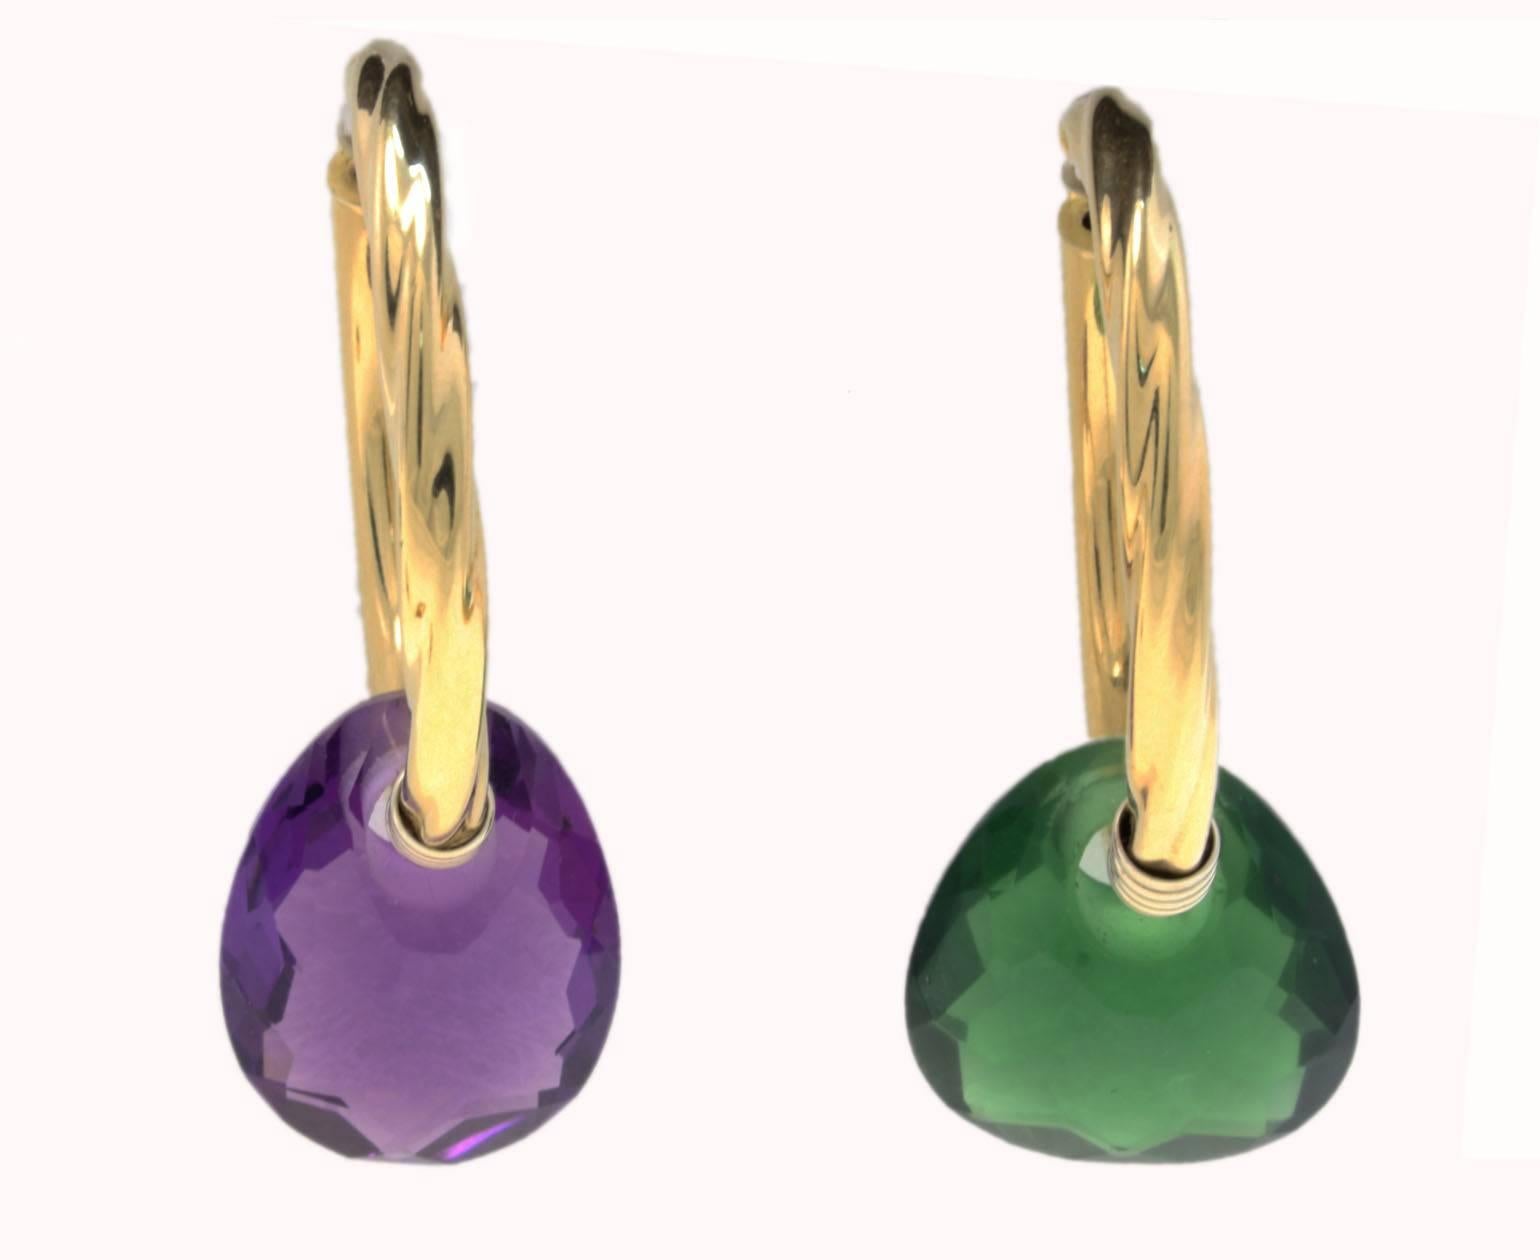 Fancy hoop earrings, they have been made to be wear in all the occasions and also, you can change as you feel. The quartz stones  and the amber are changeable, you can choose between the green and the purple quartz or the amber  to add to the